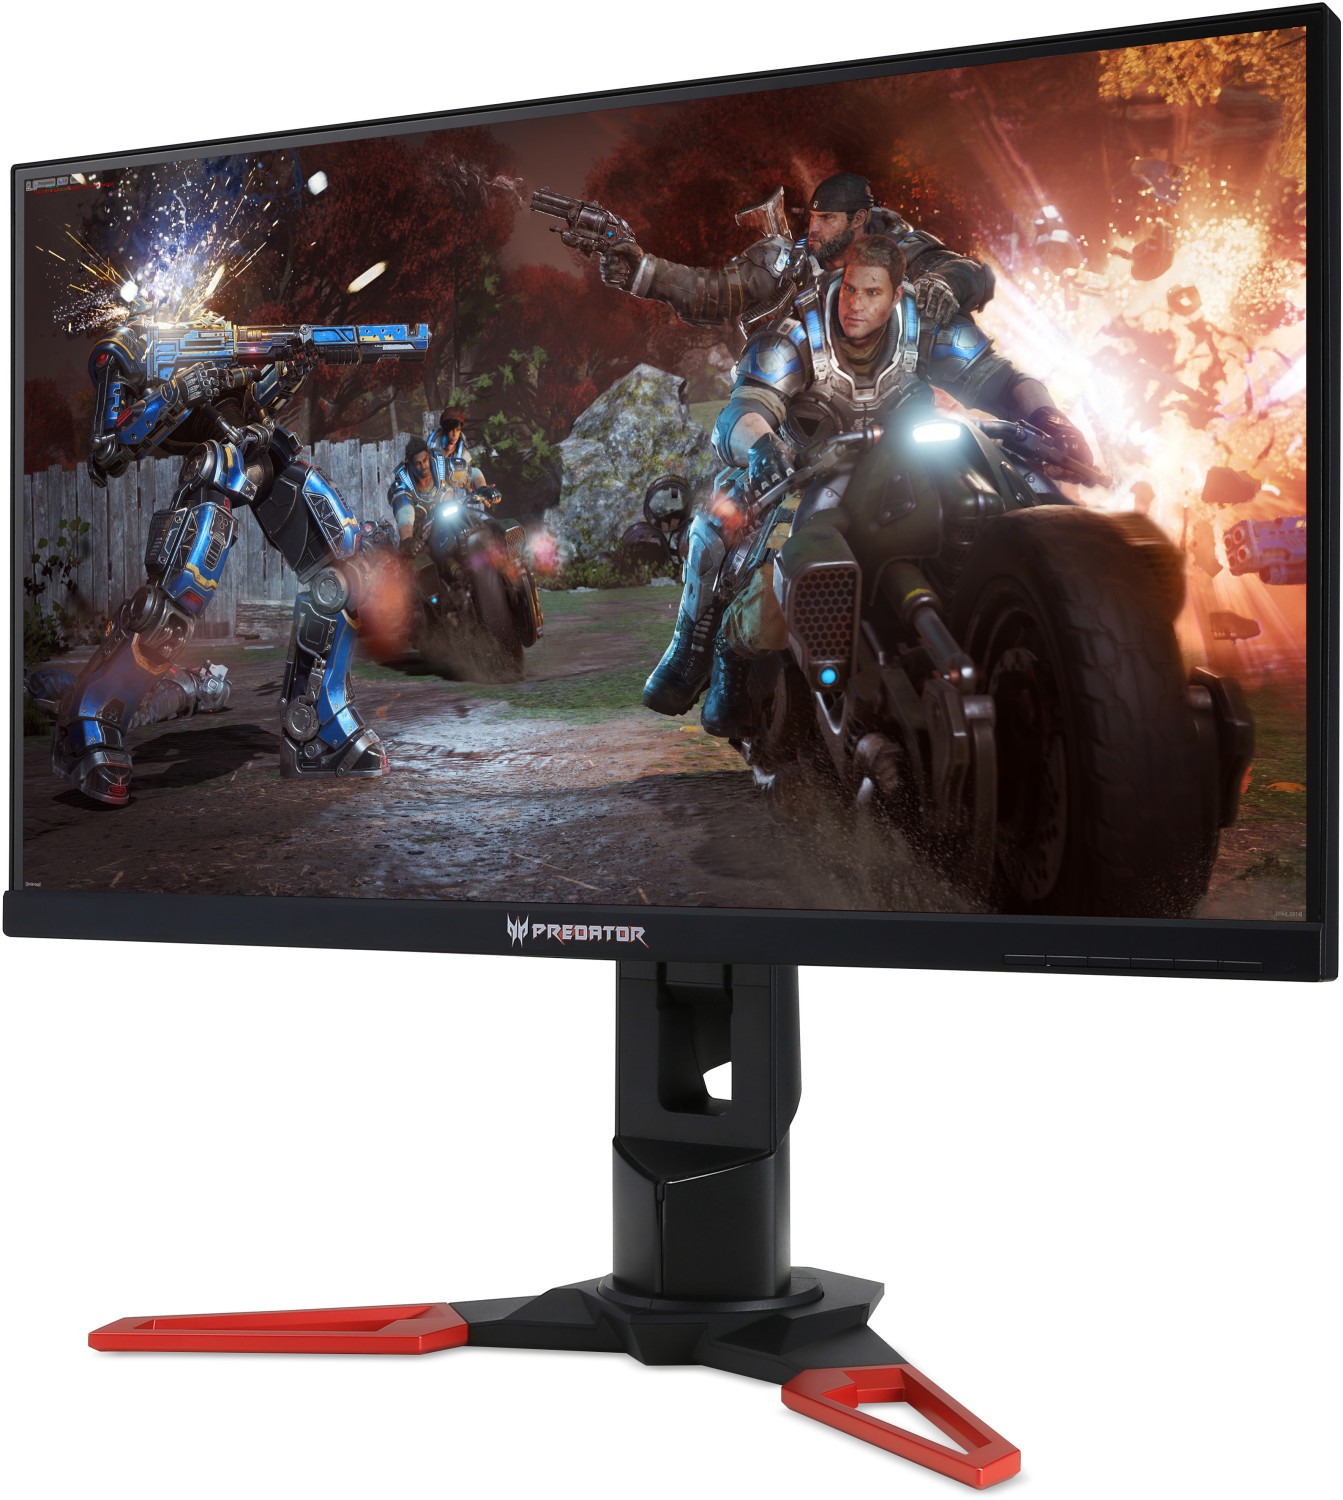 Buy Acer Predator XB271HU from £799.99 (Today) – Best Deals on idealo.co.uk